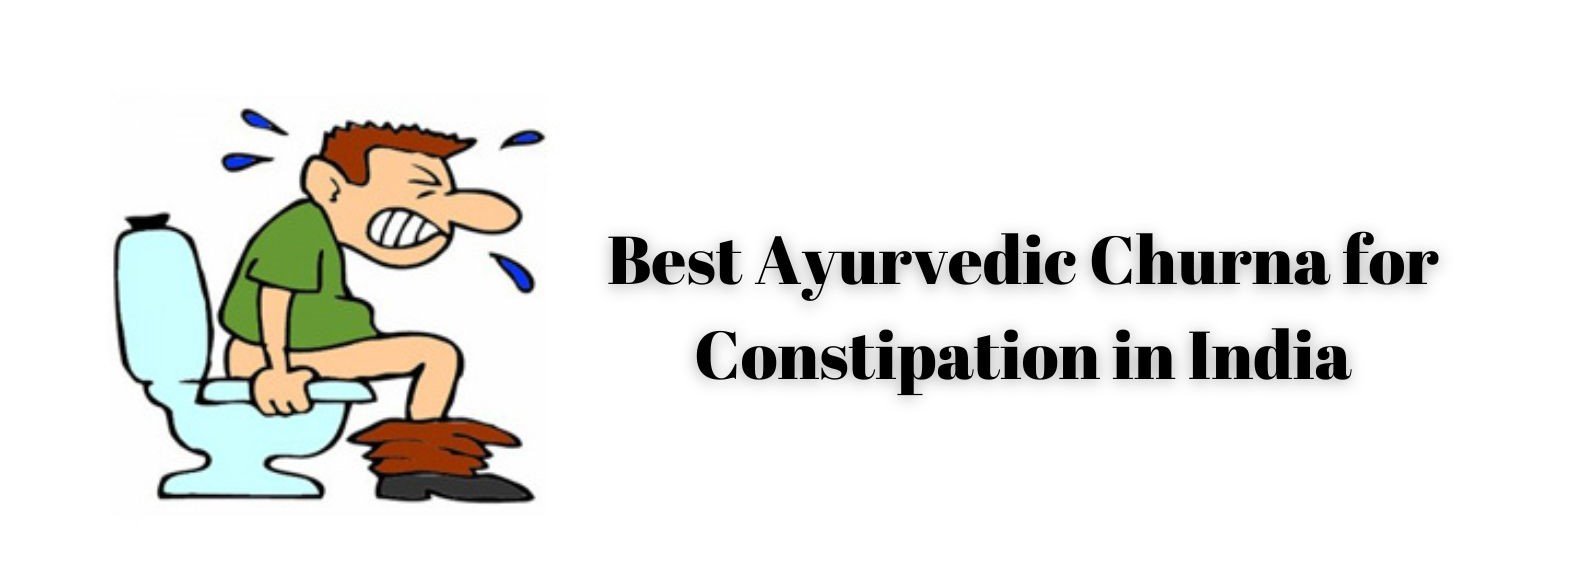 Best Ayurvedic Churna for Constipation in India